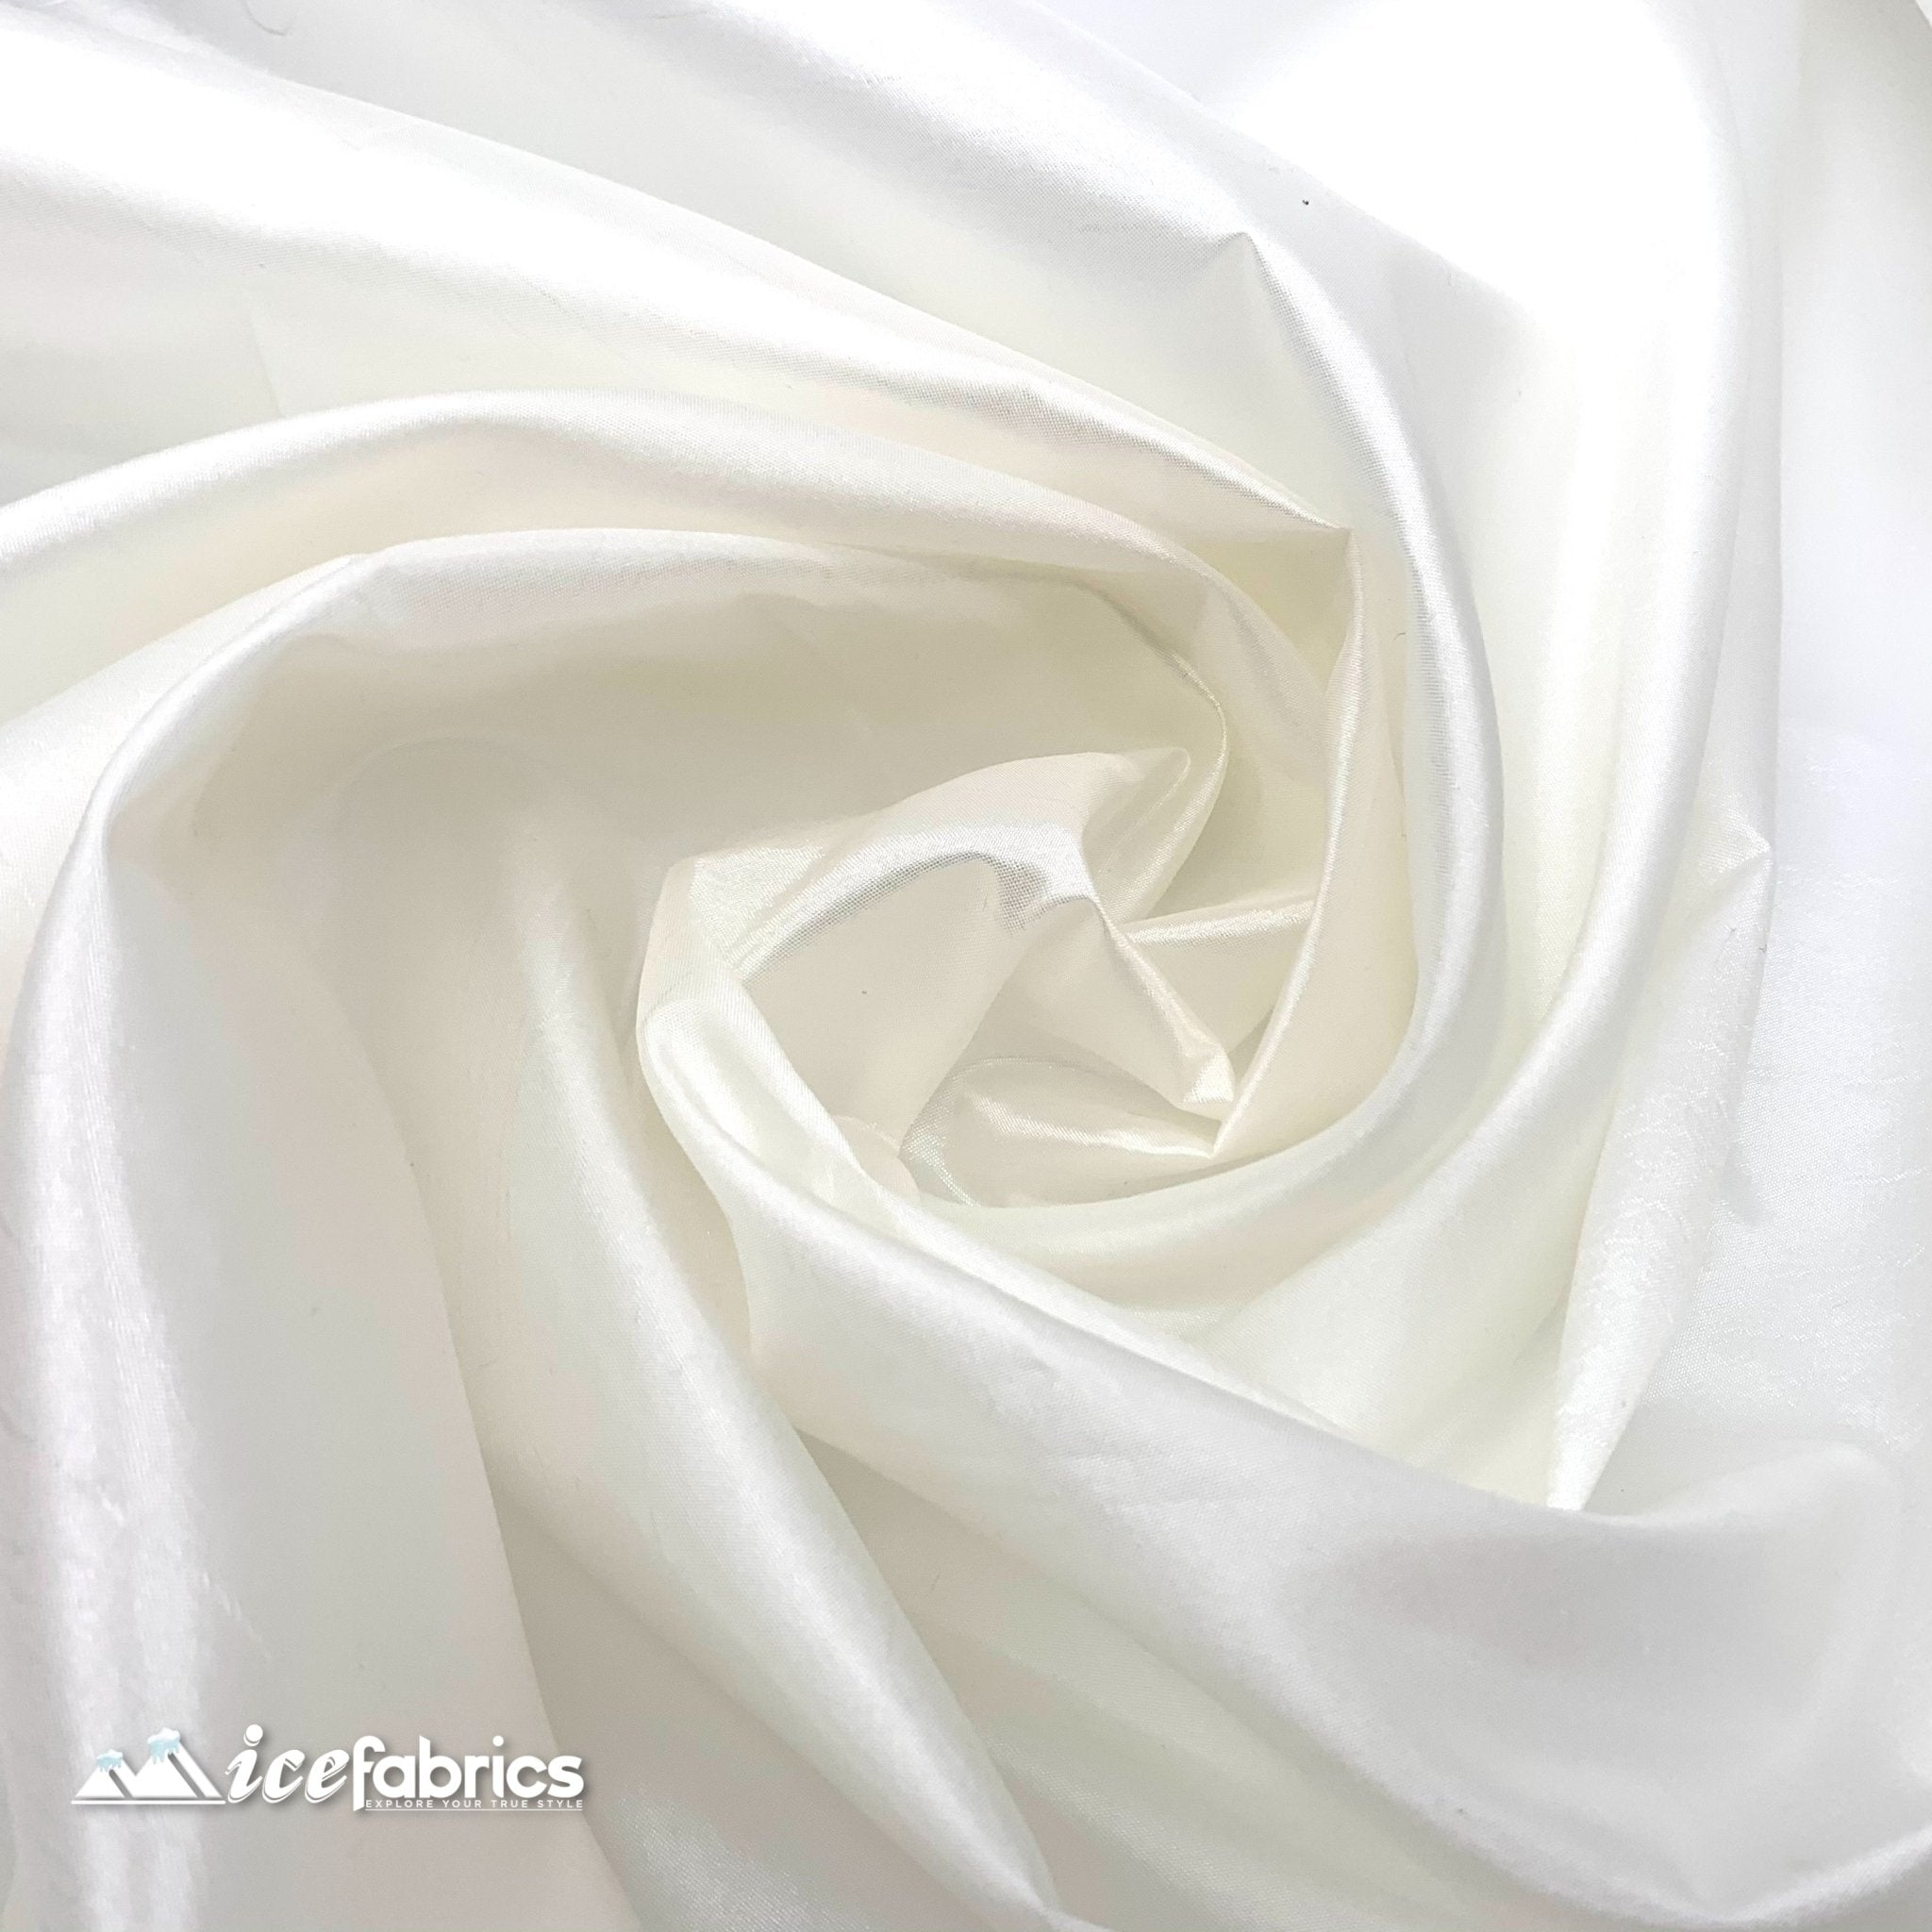 High Quality Solid Taffeta Fabric_ 60" Width_ By The YardTaffeta FabricICEFABRICICE FABRICSIvoryHigh Quality Solid Taffeta Fabric_ 60" Width_ By The YardTaffeta FabricICEFABRICICE FABRICSIvoryHigh Quality Solid Taffeta Fabric_ 60" Width_ By The Yard ICEFABRIC Ivory